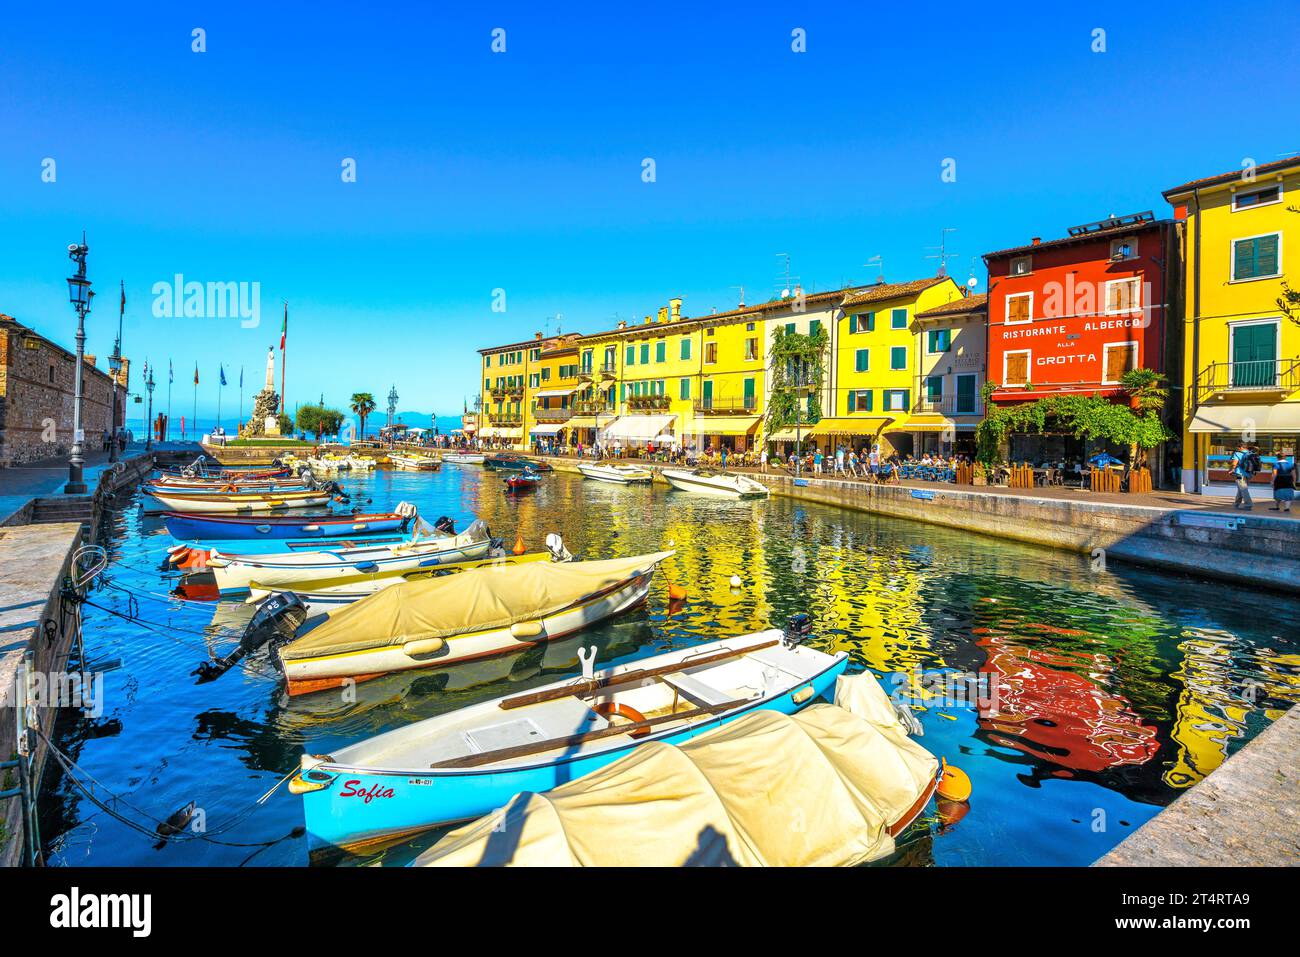 LAZISE, VENETO - ITALY - SEPTEMBER 28, 2018: Boats in old town port of Lazise and tourists walking in the morning. The town is a popular holiday desti Stock Photo